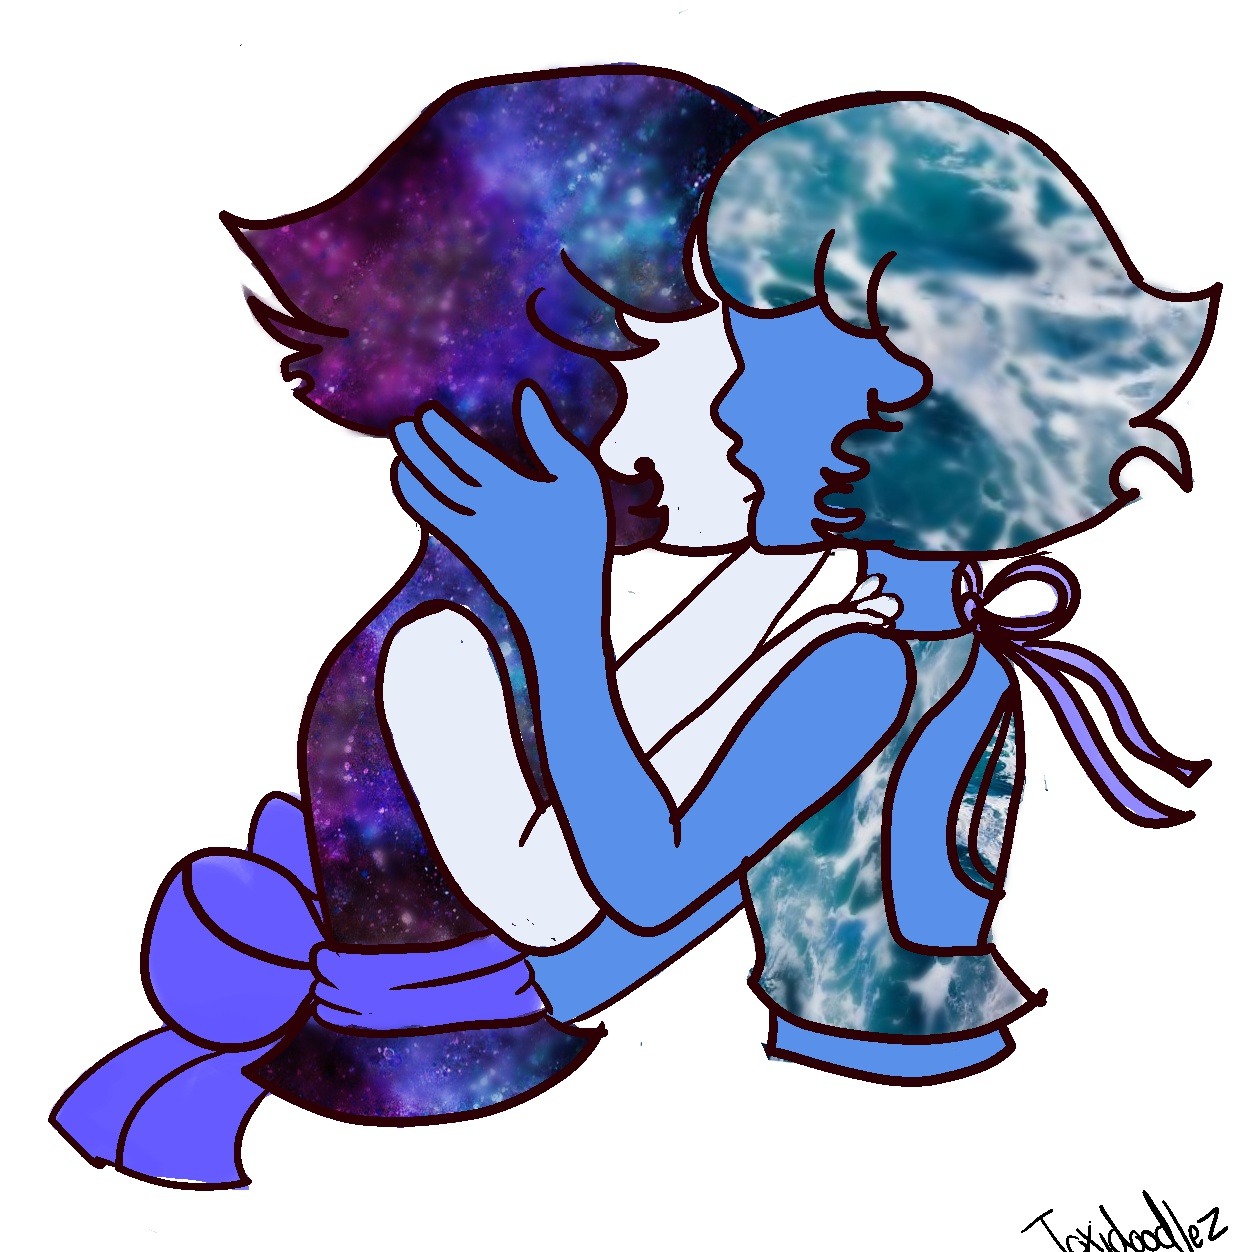 i’m kind of proud of this? Space gay and Ocean gay